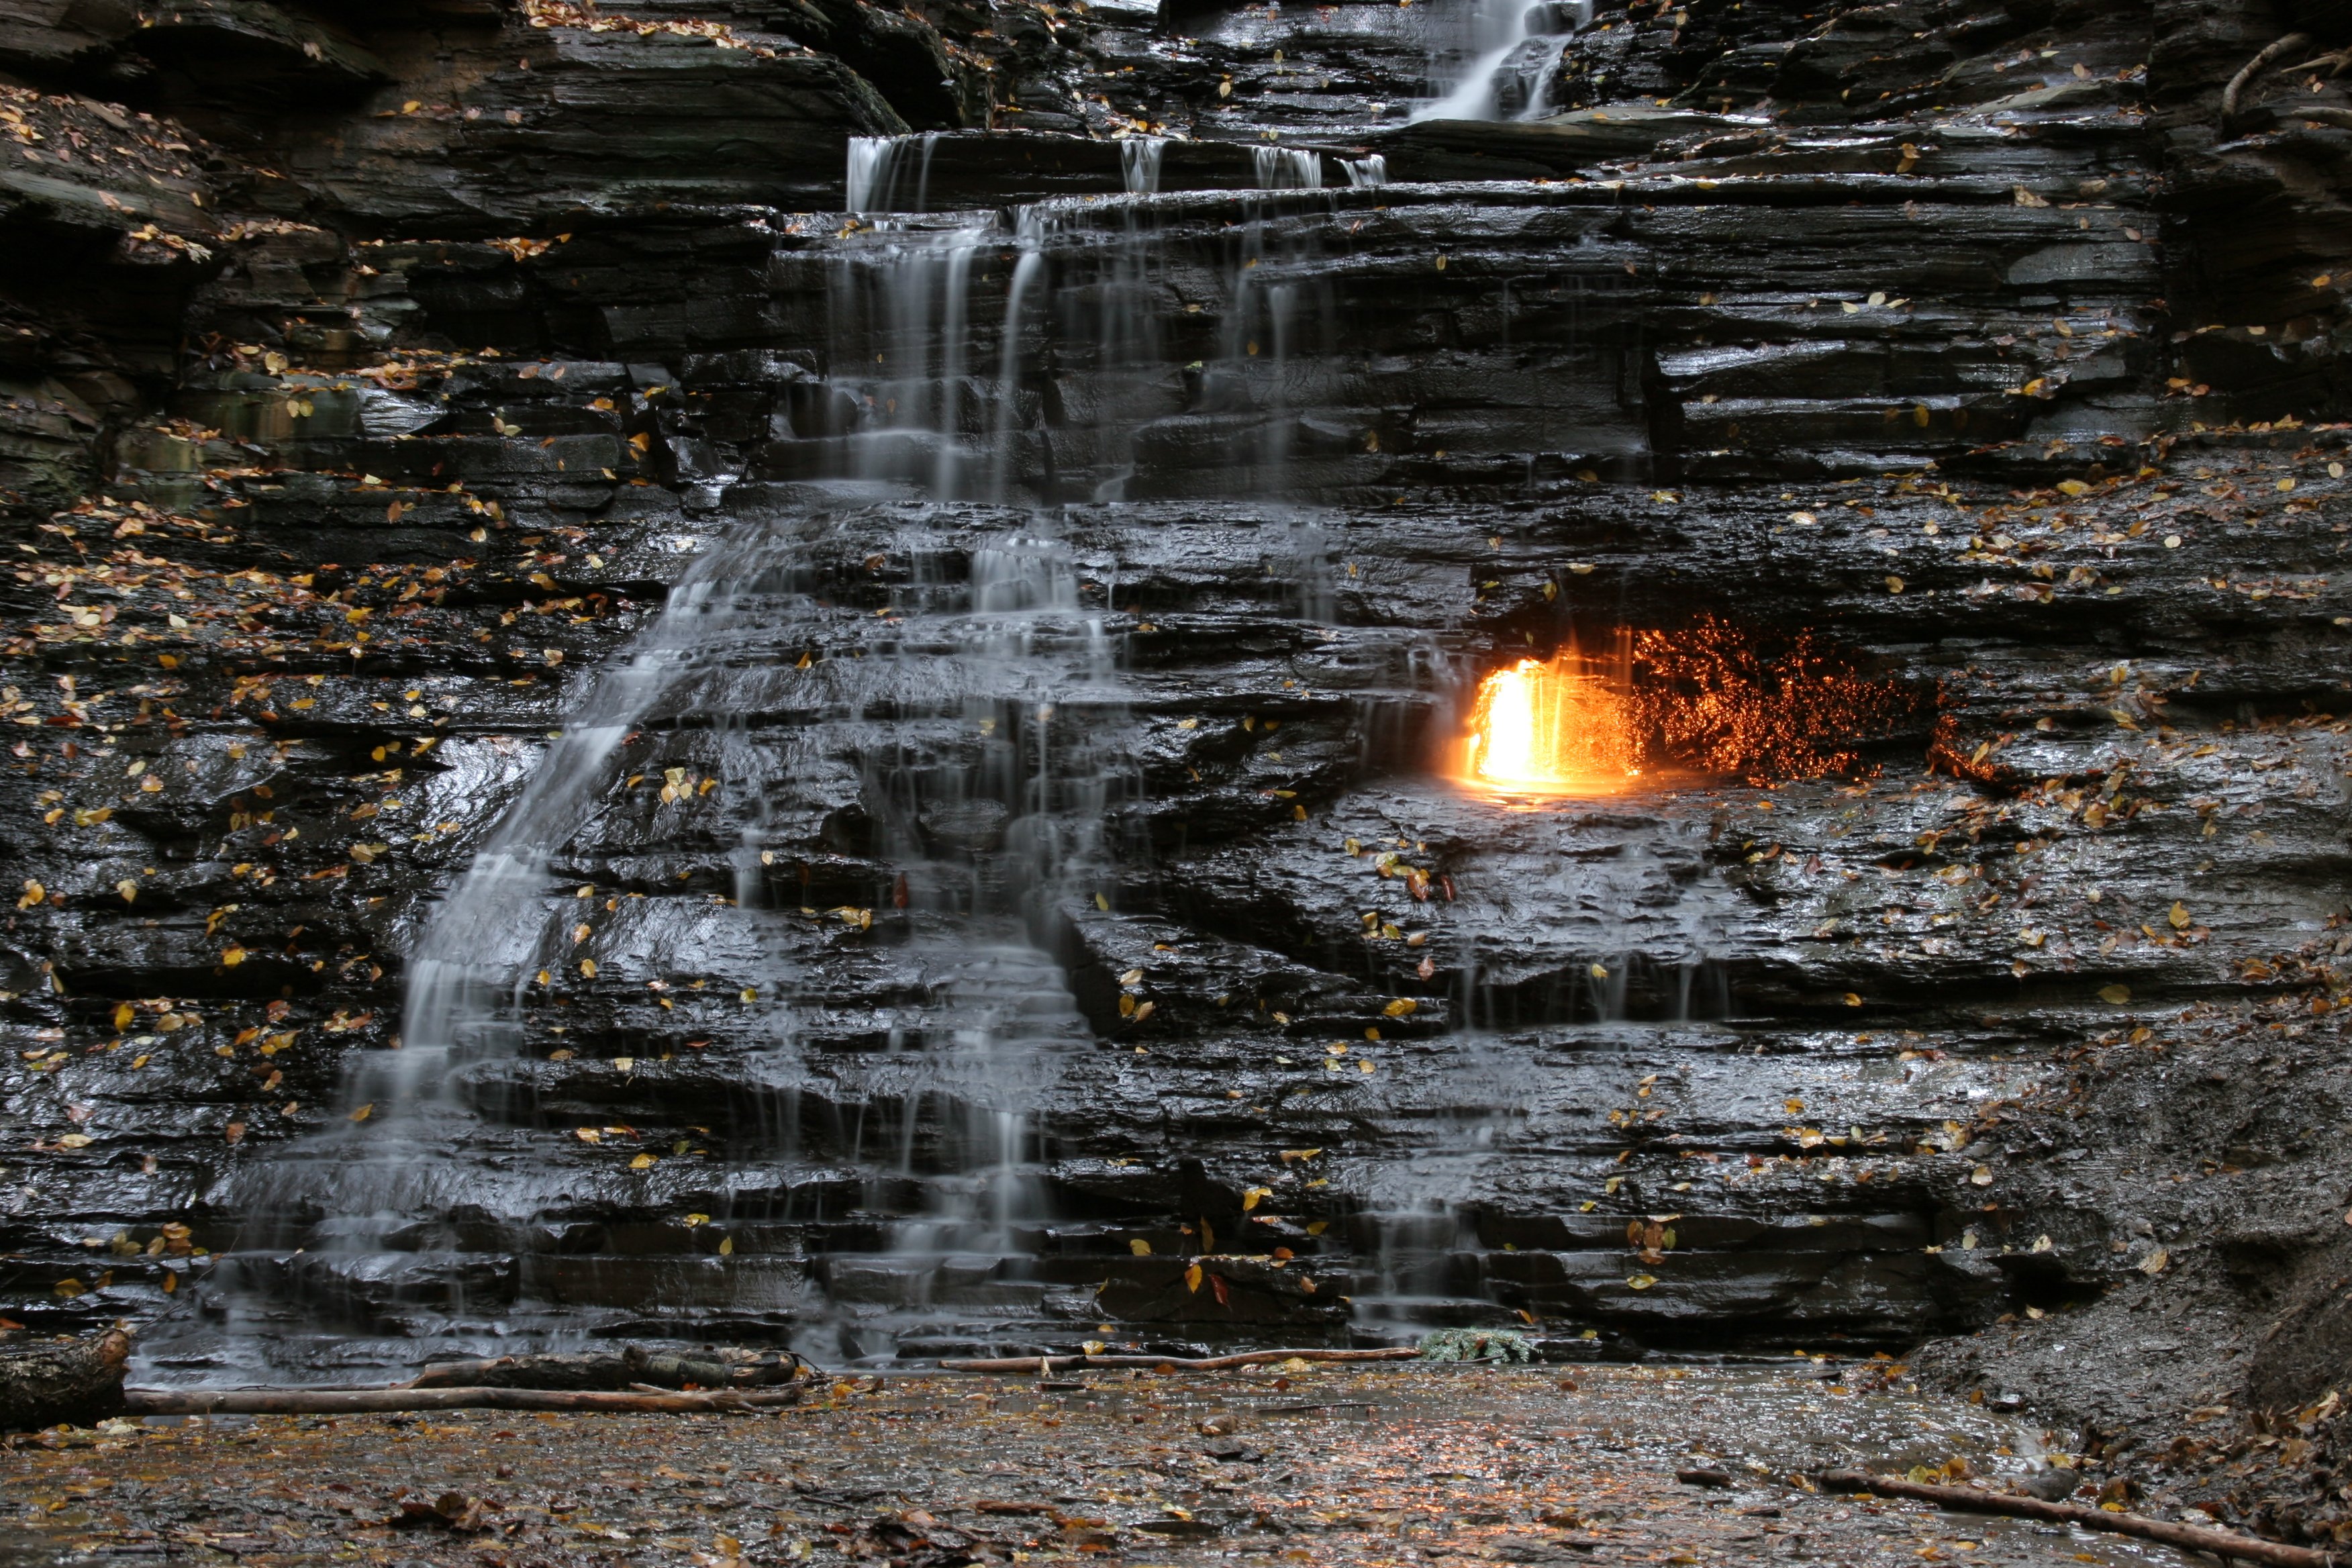 Eternal Flame Fall, Orchard Park, New York